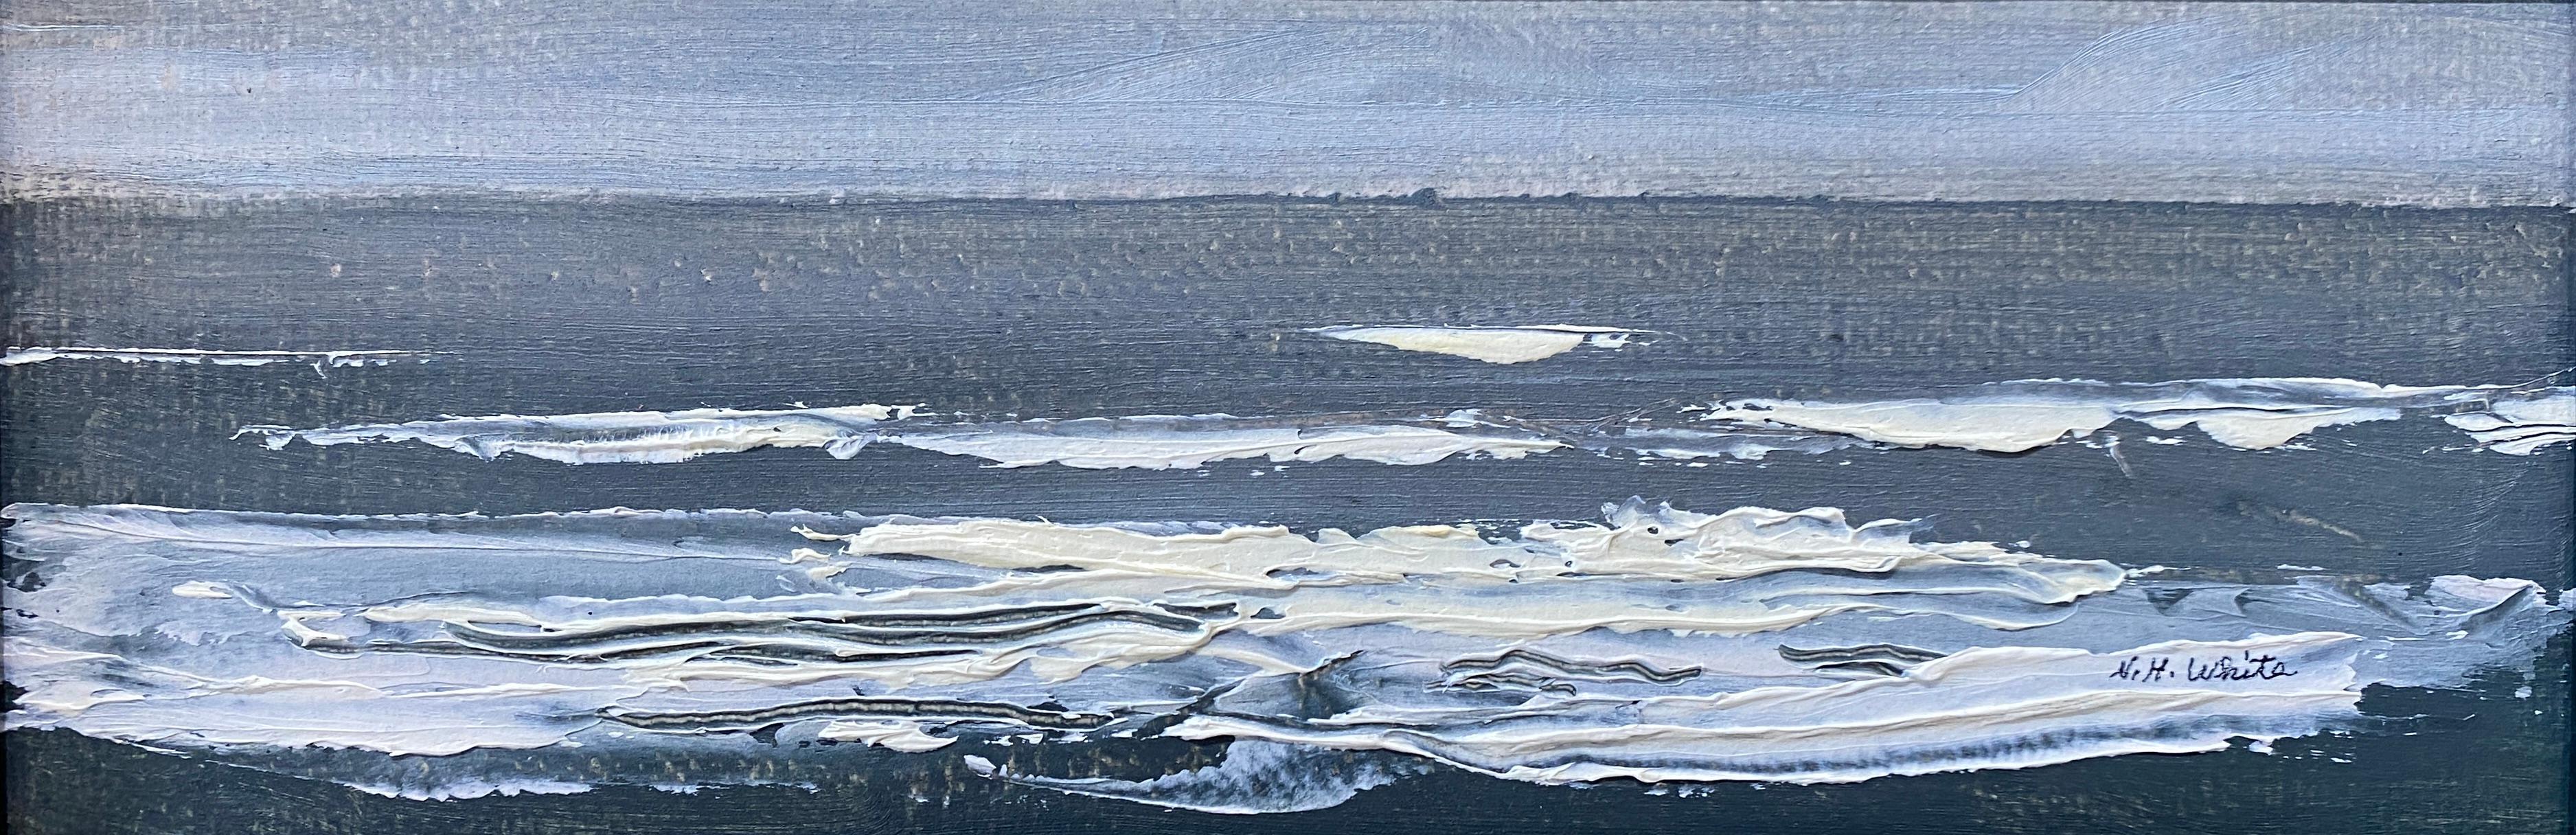 Nelson White Landscape Painting - The Waves 09.29.22